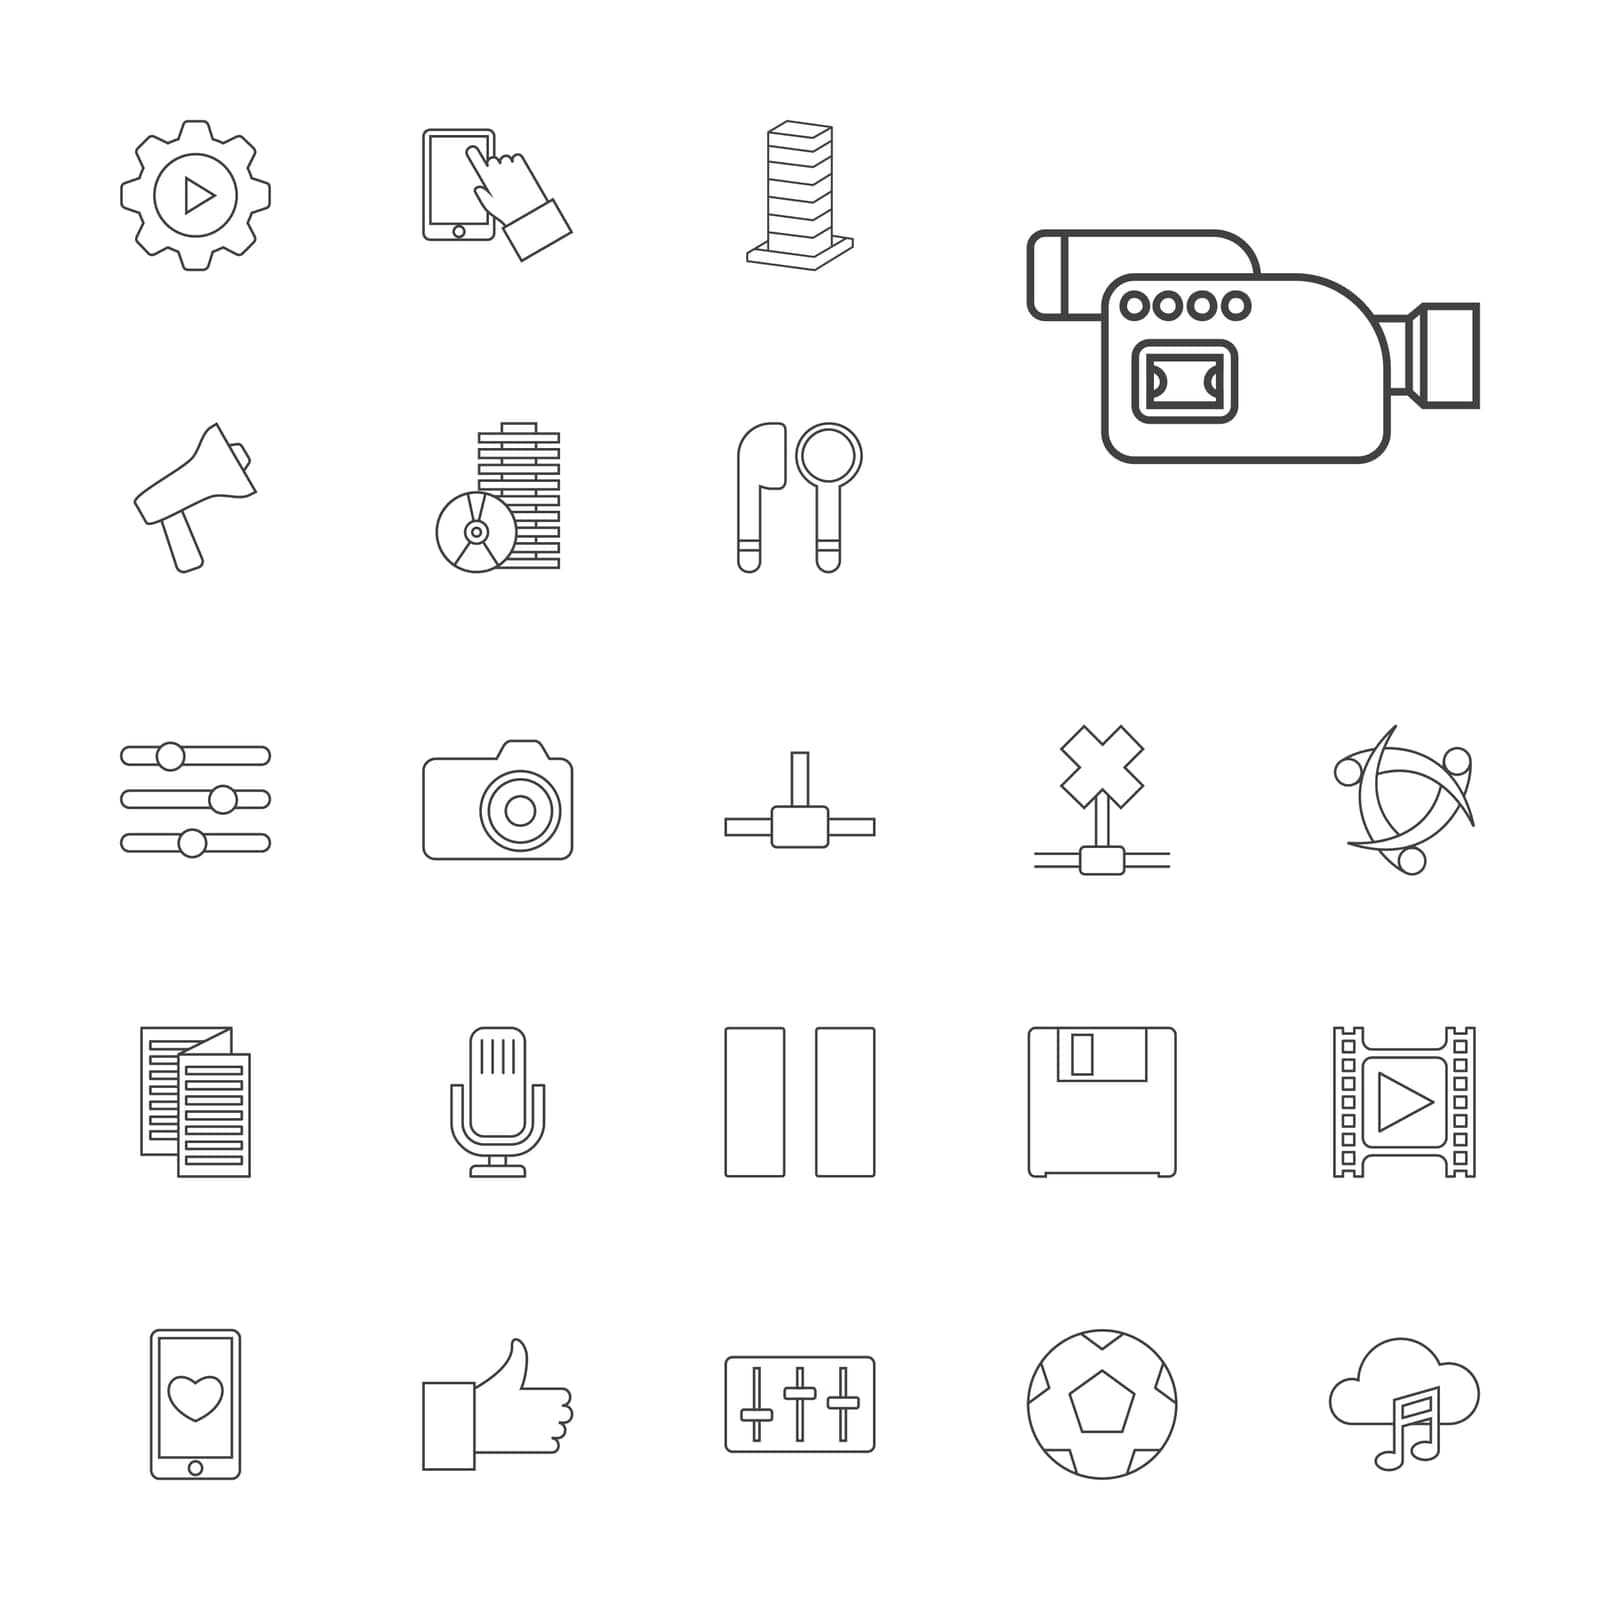 play,symbol,slider,movie,thumb,concept,icon,sign,isolated,diskette,media,building,network,cloud,music,white,tape,web,design,connection,vector,up,camera,communication,microphone,sliders,digital,news,set,business,in,center,mobile,touchscreen,technology,heart,pause,volume,background,disc,illustration,internet,gear